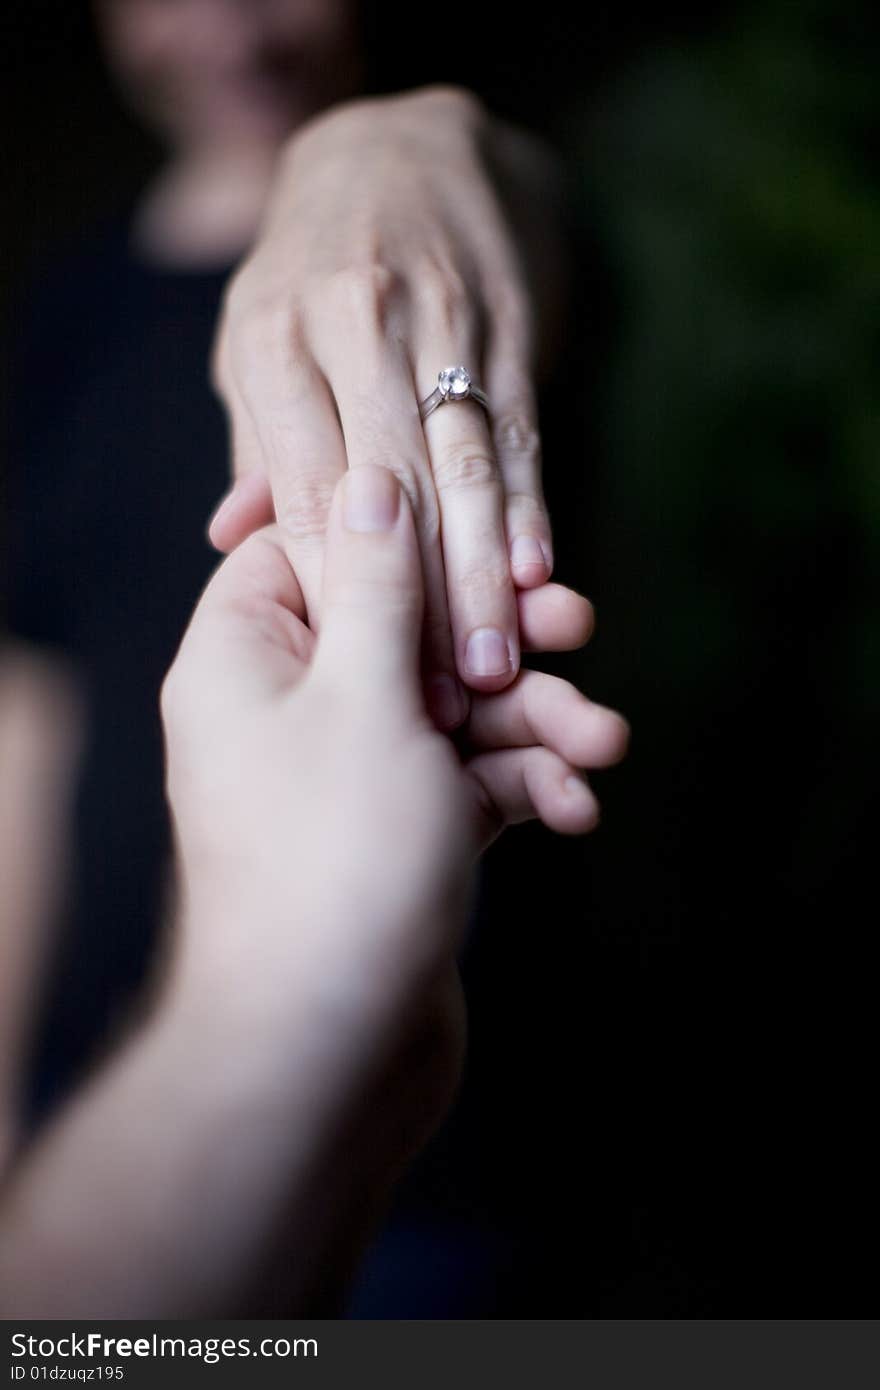 A woman holds her hand up to show her wedding ring as a man holds her hand up to see the ring. A woman holds her hand up to show her wedding ring as a man holds her hand up to see the ring